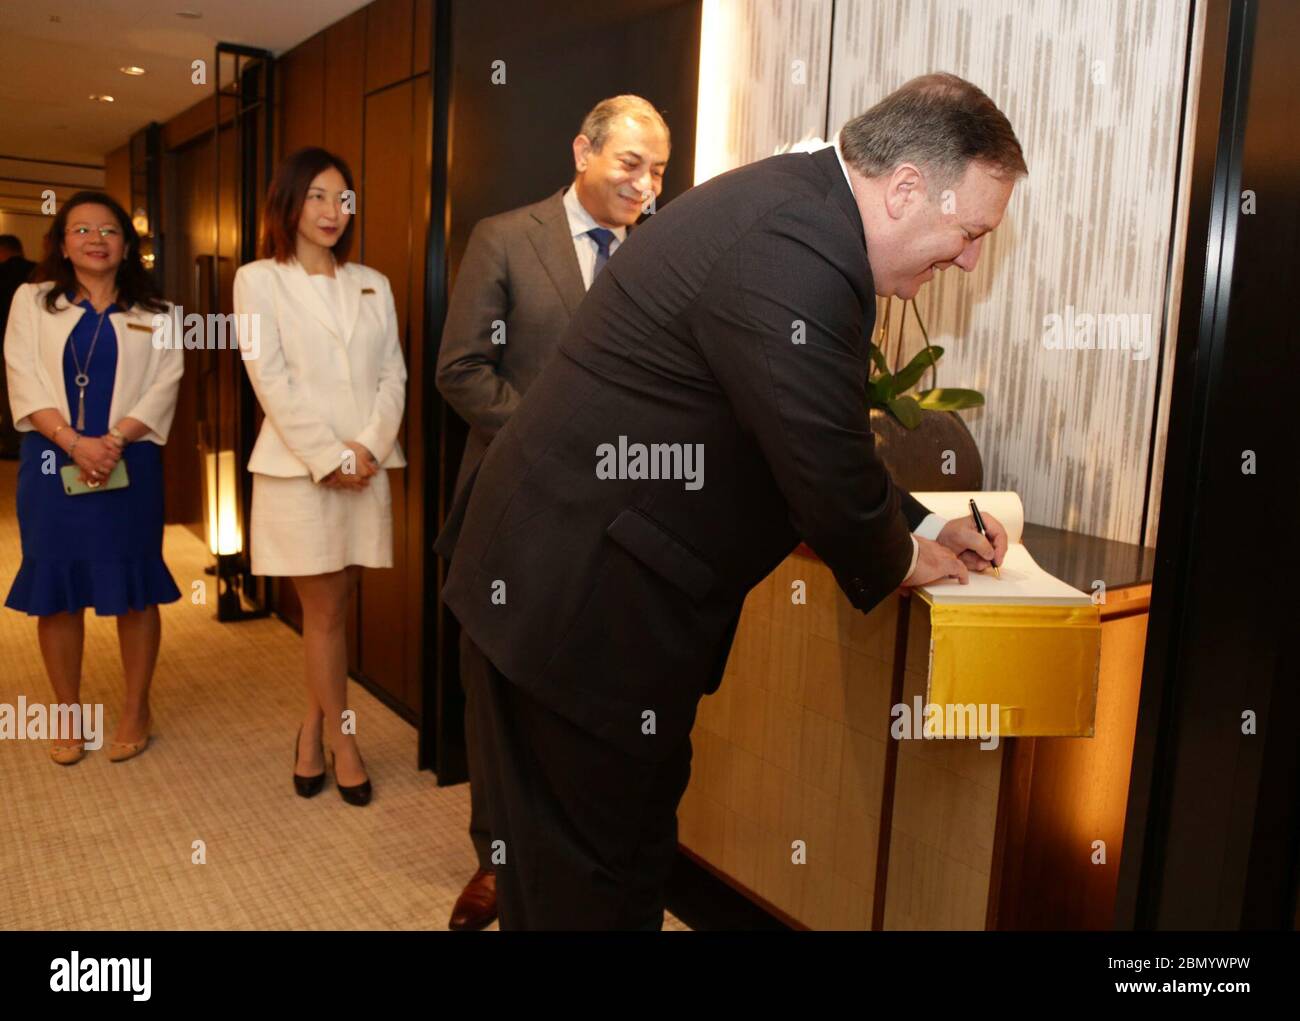 Secretary Pompeo Signs Guest Book in Singapore U.S. Secretary of State Mike Pompeo meets staff and signs the guest book at the Shangri-La Hotel in Singapore, June 13, 2018. Stock Photo